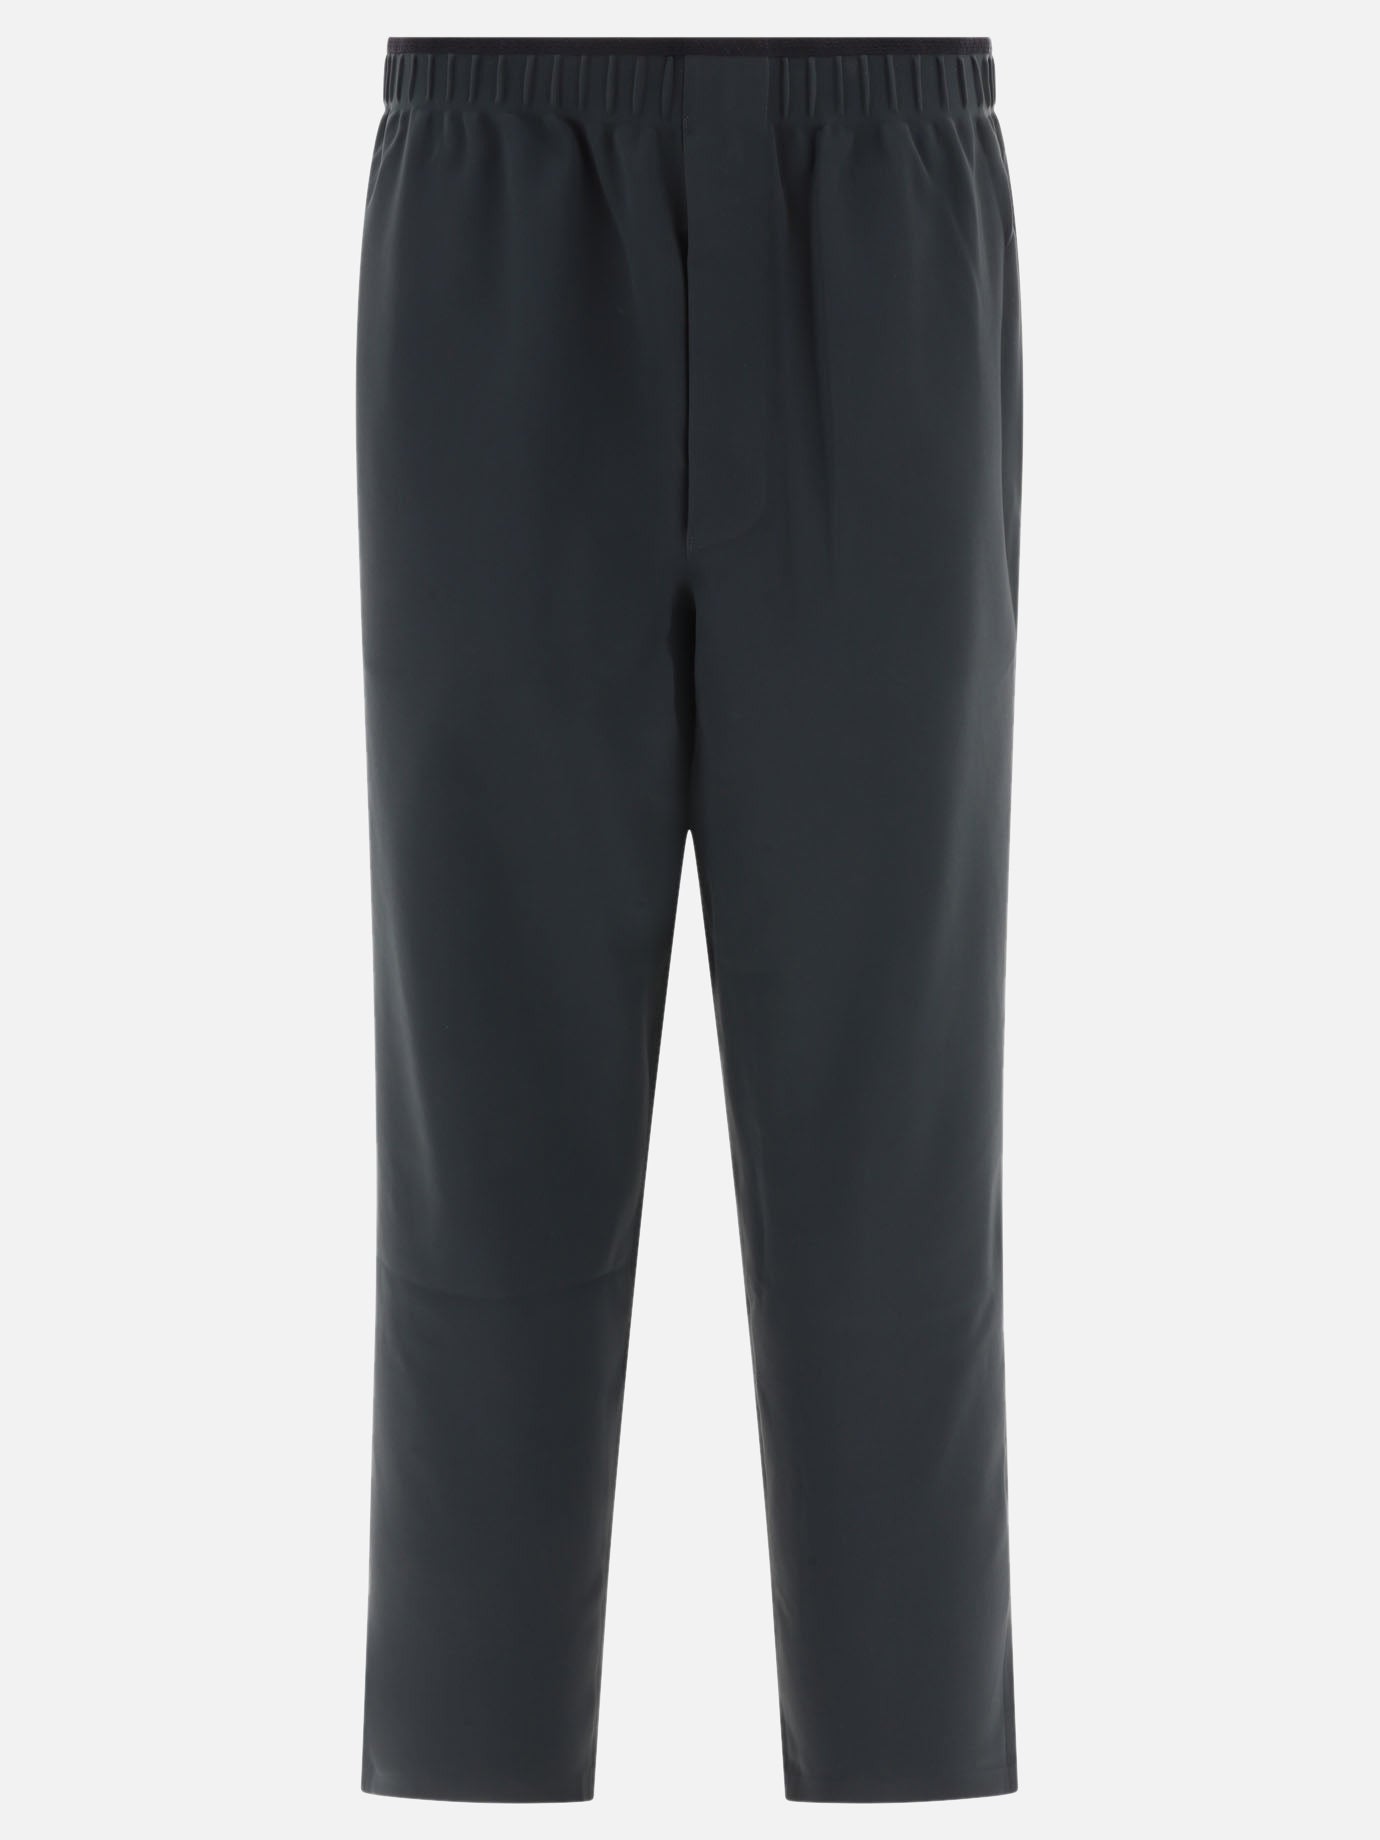 "Bonded" trousers